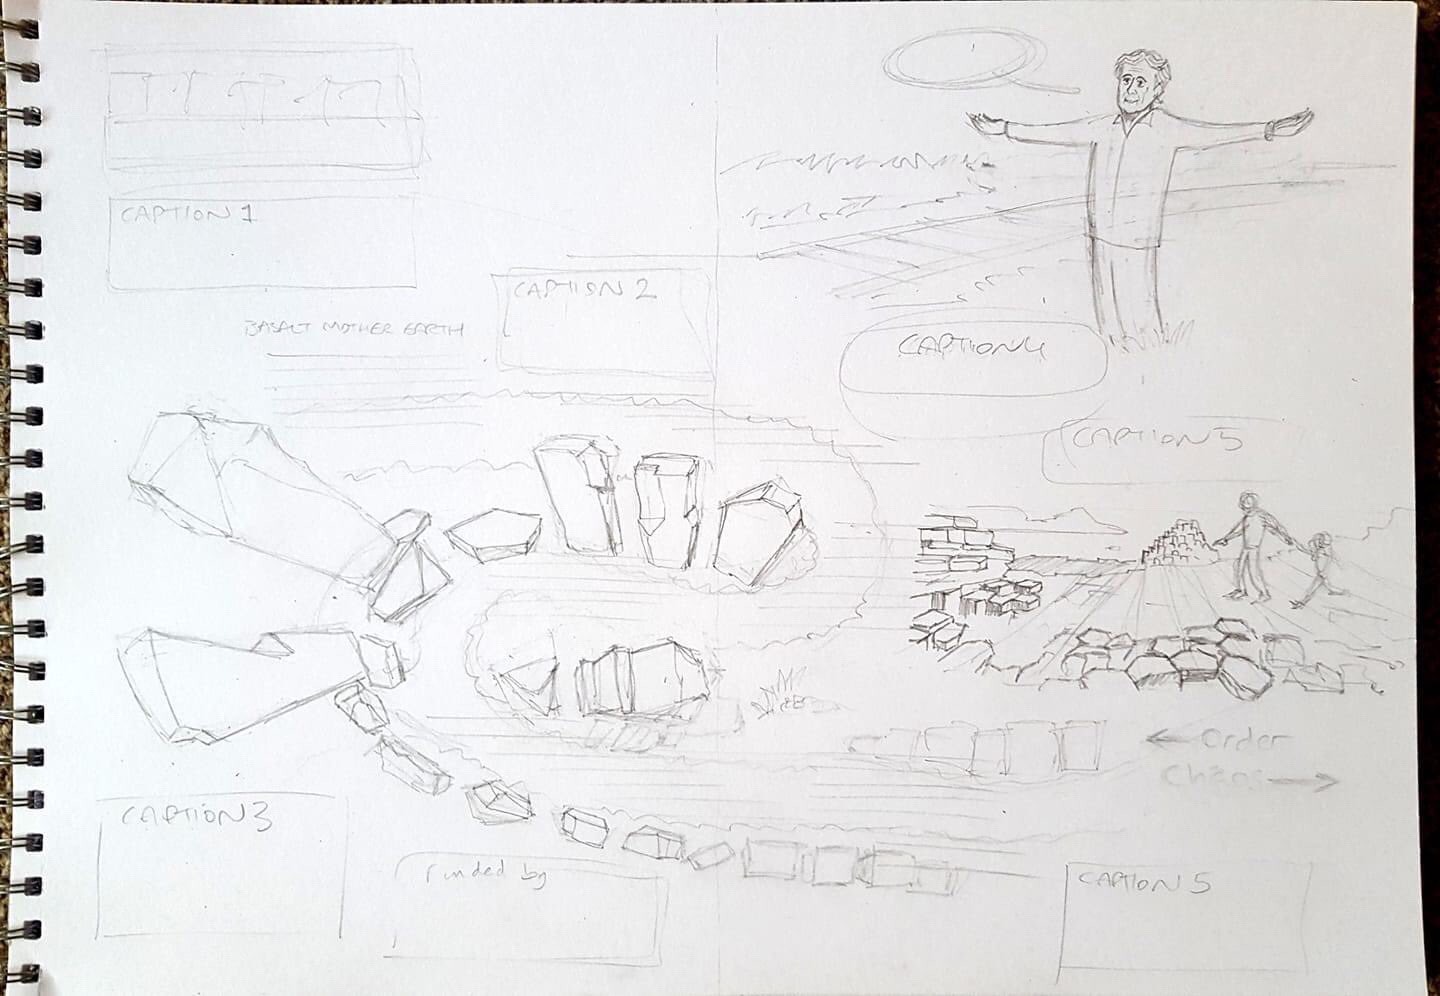 Process - Colin Maxwell revealed on Twitter his sketch to digital of a double page spread from the Kirknewton comic. It’s about a landscape artwork by Charles Jencks called “A Stone’s Progress”